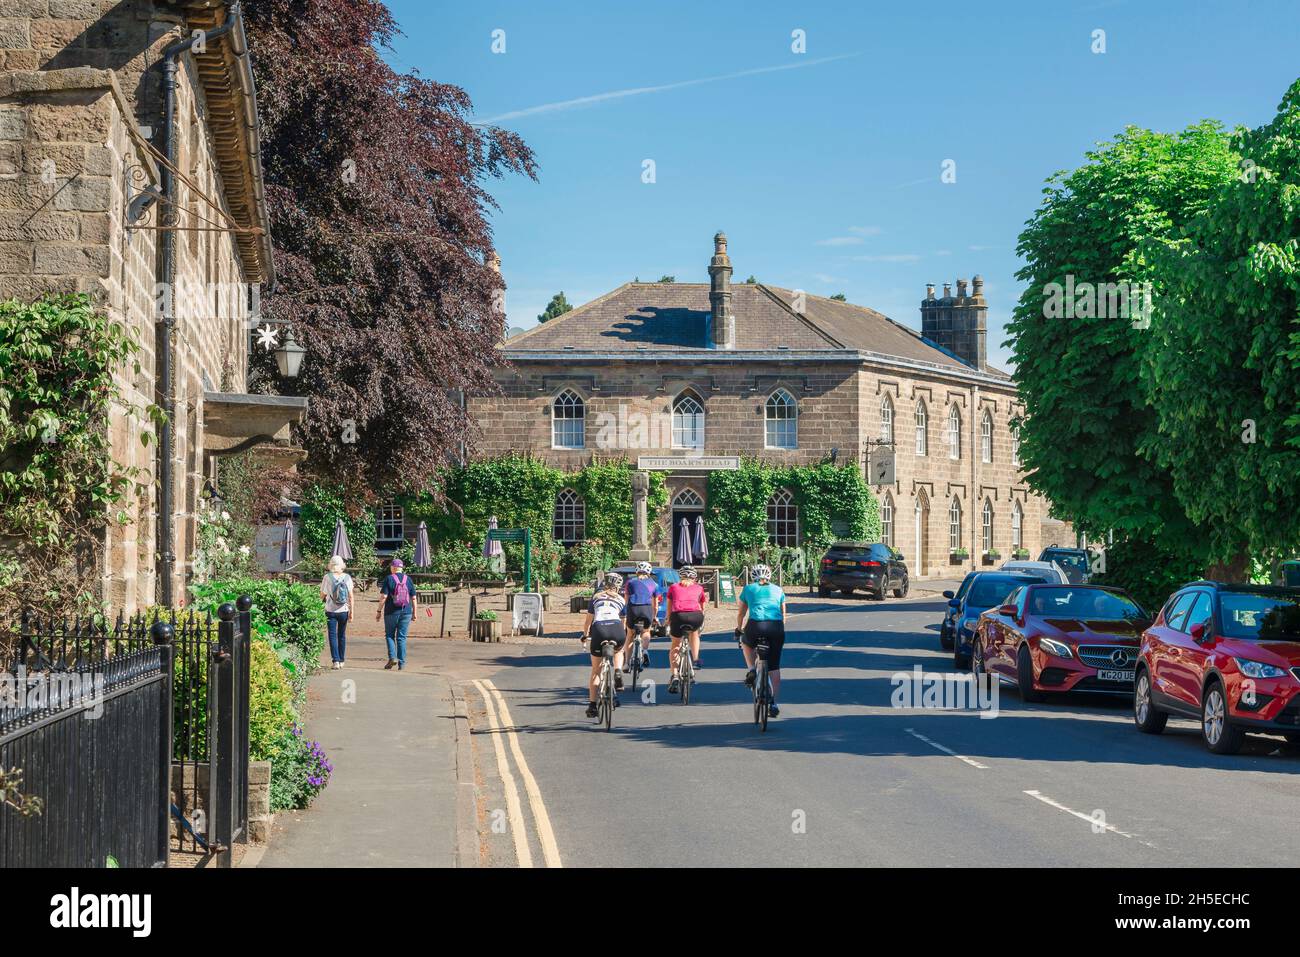 Ripley Yorkshire, view in summer of cyclists riding through Main Street in the scenic village of Ripley with the Boars Head Hotel directly ahead, UK Stock Photo